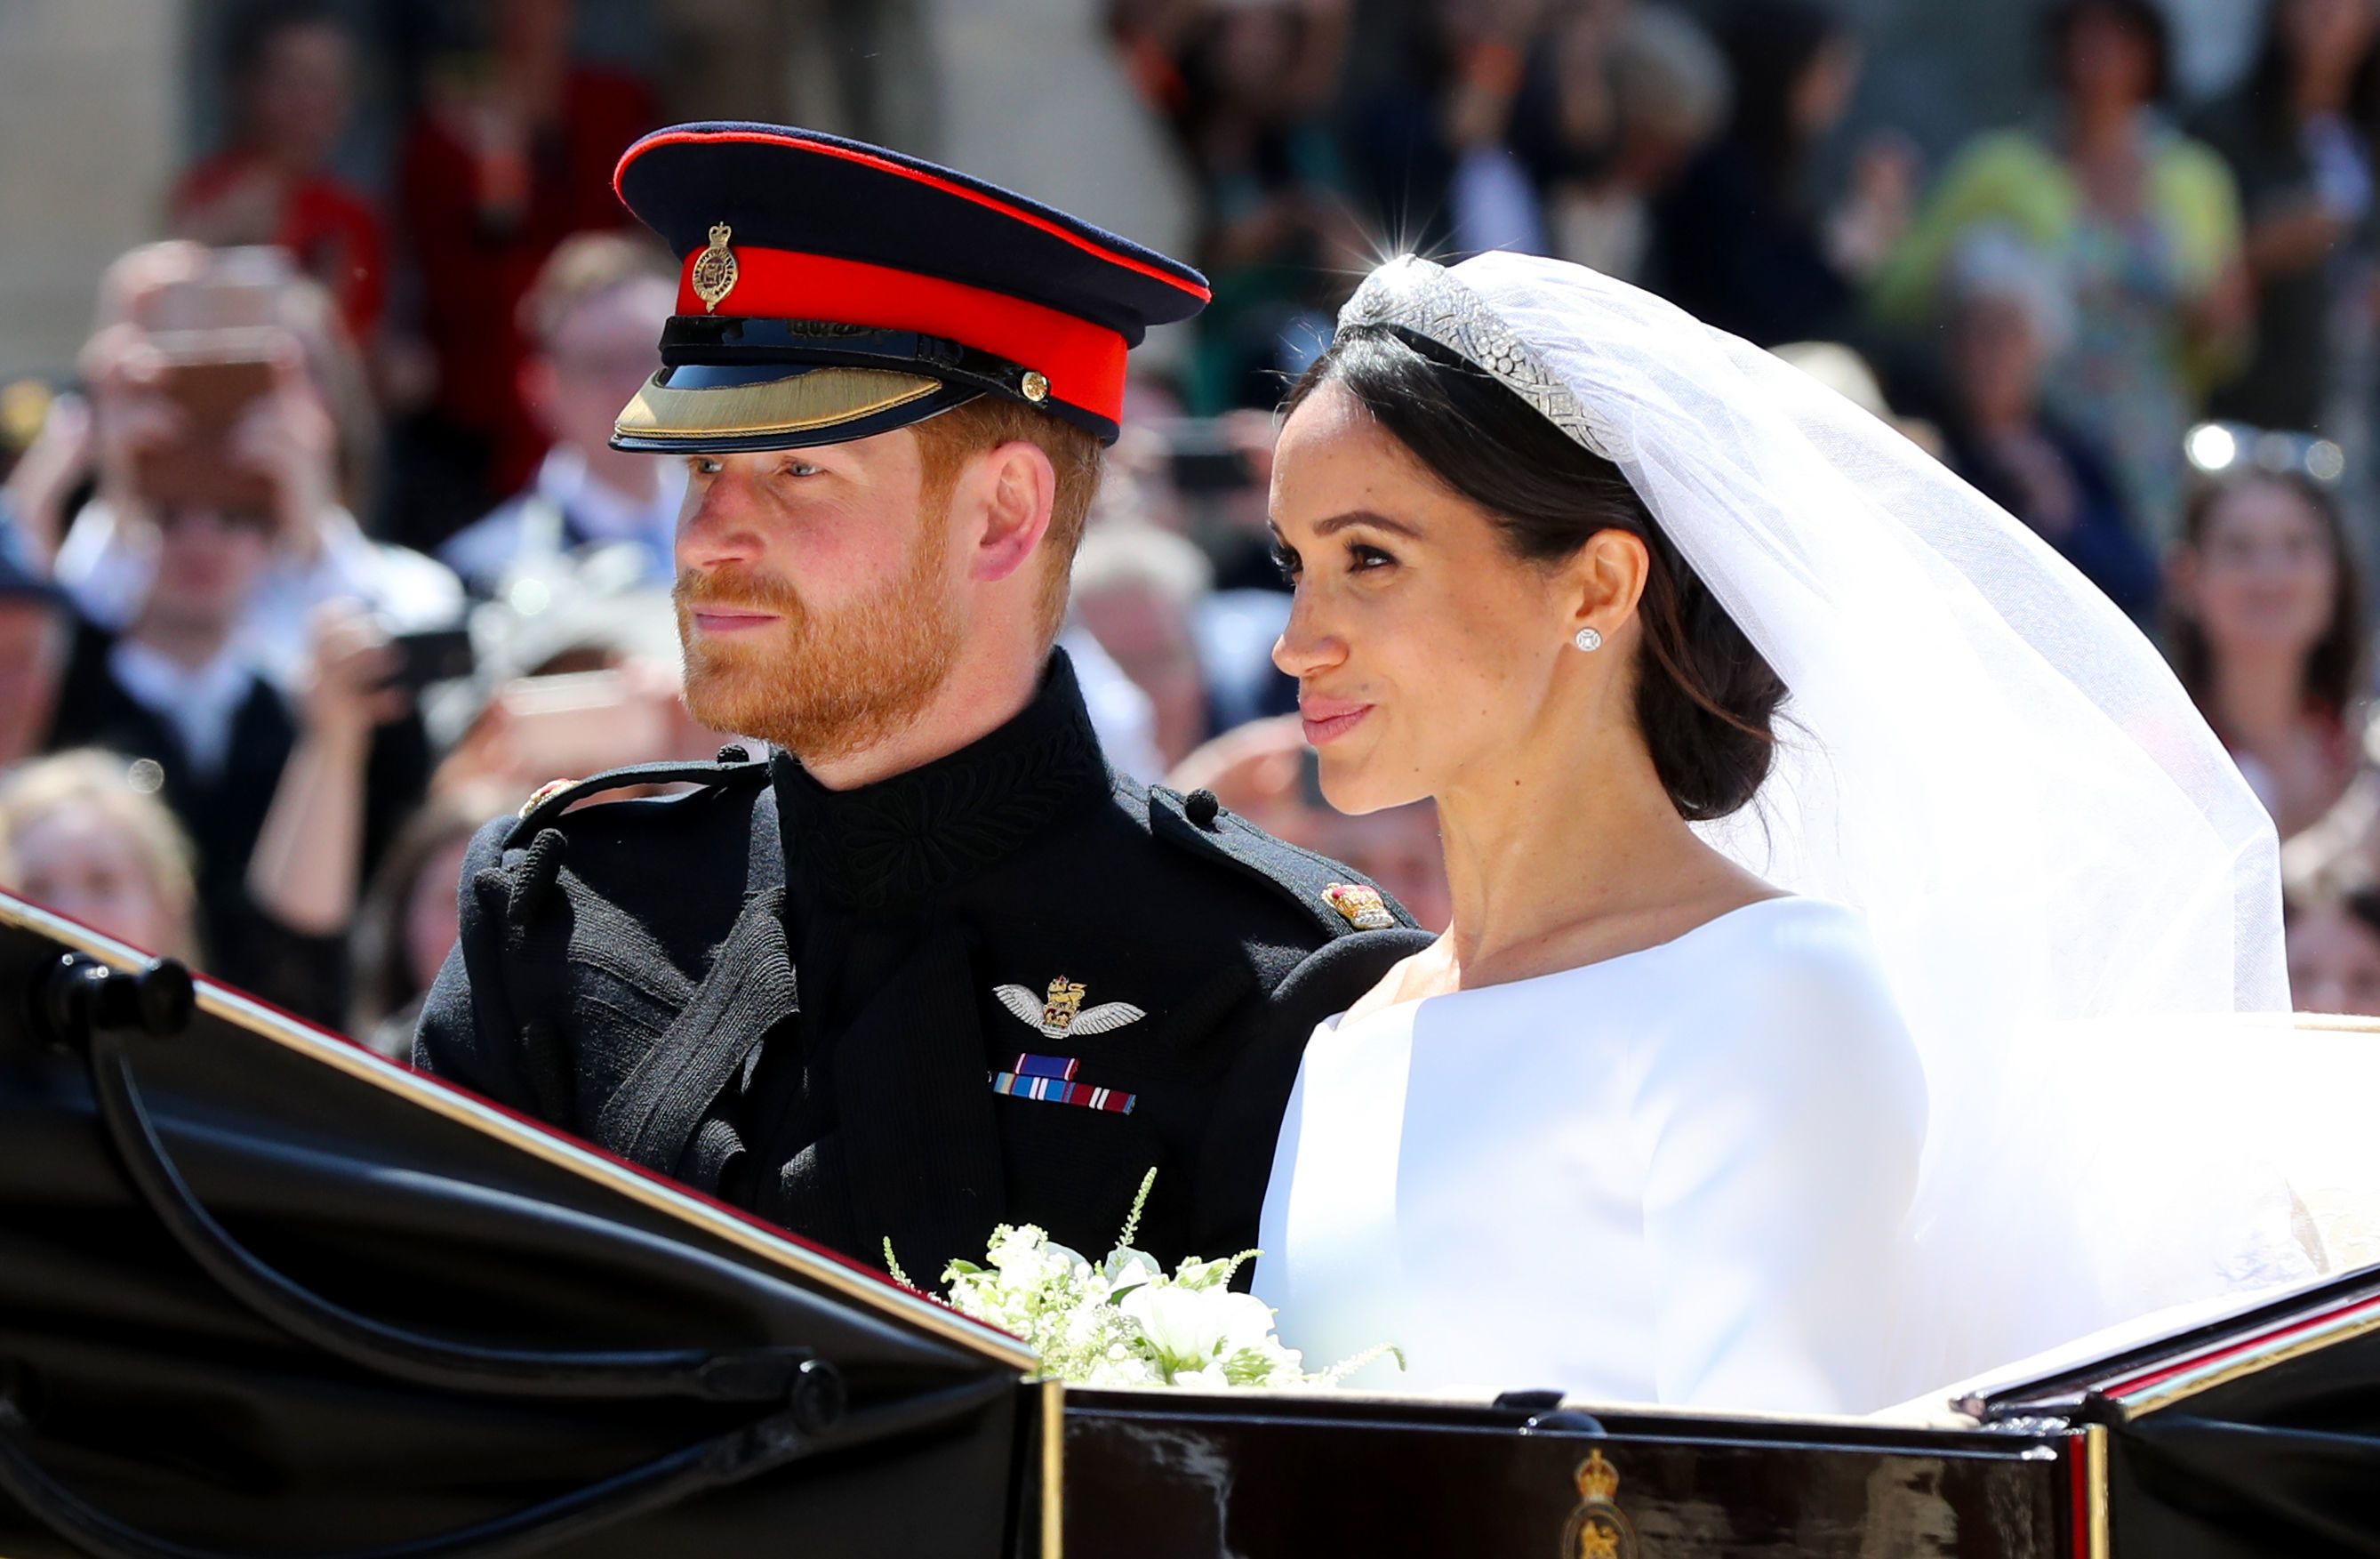 14 Best Moments You Missed From Prince Harry And Meghan Markle Royal Wedding